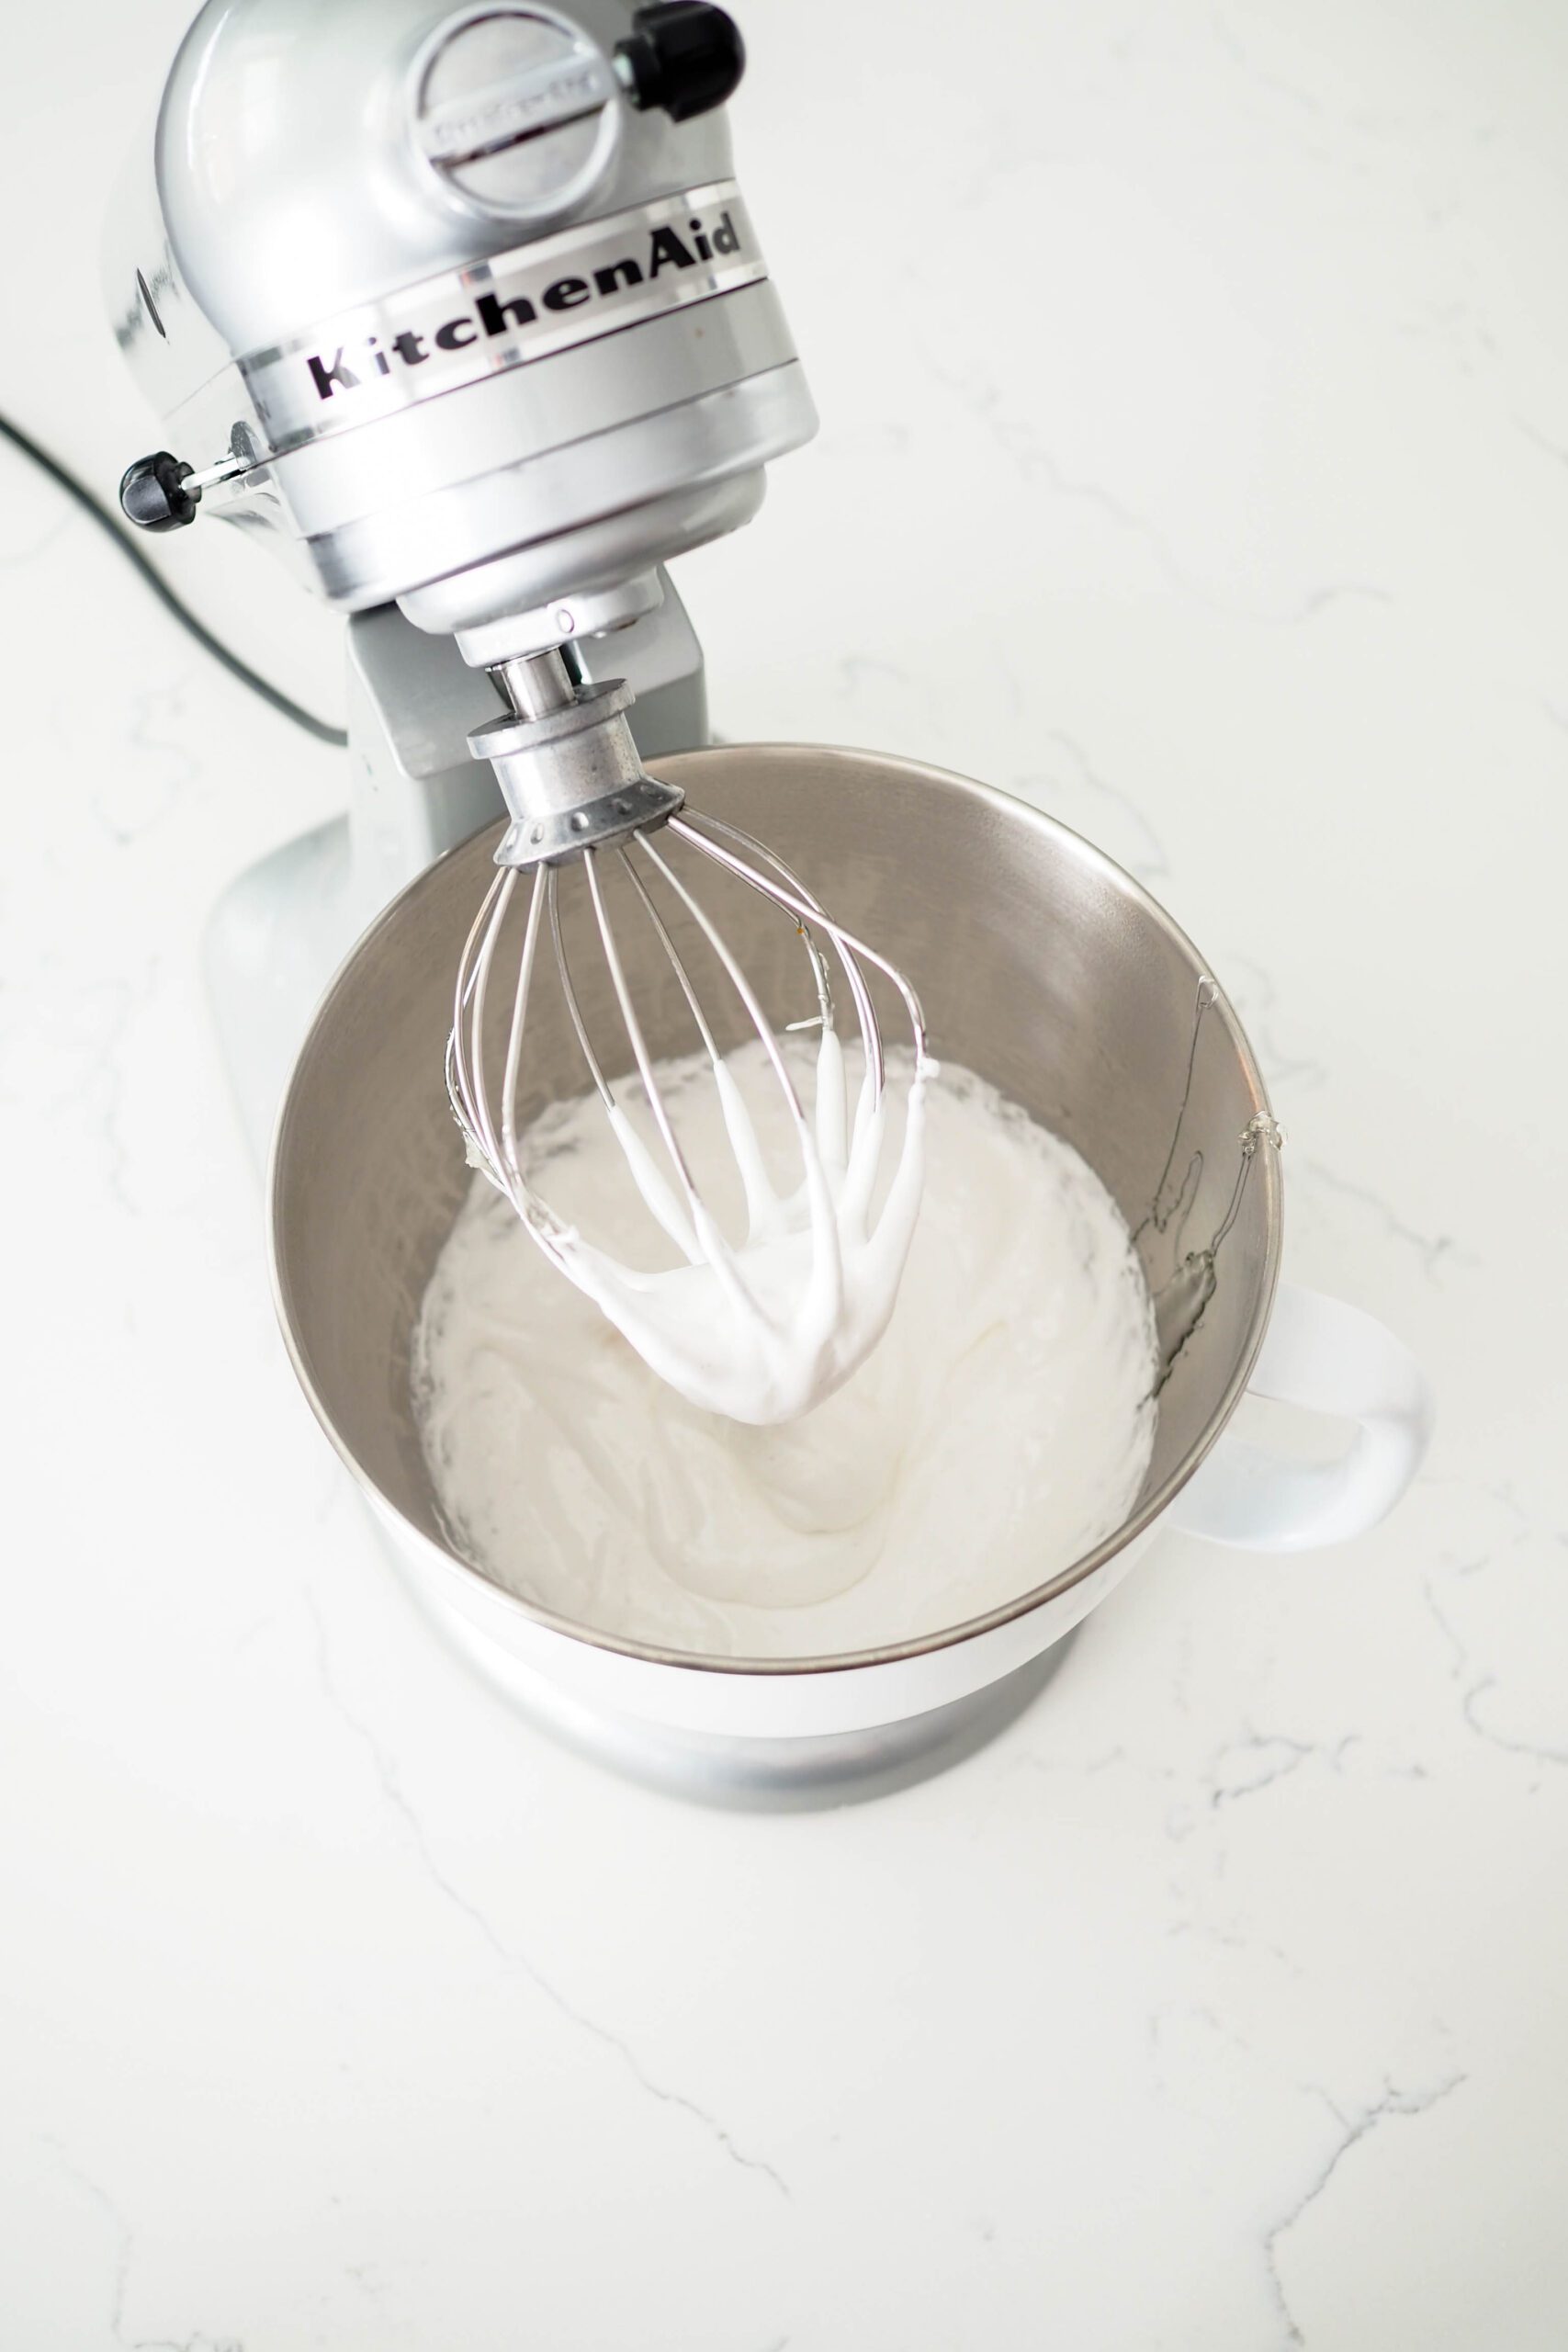 Marshmallow gathers in the whisk of a stand mixer.